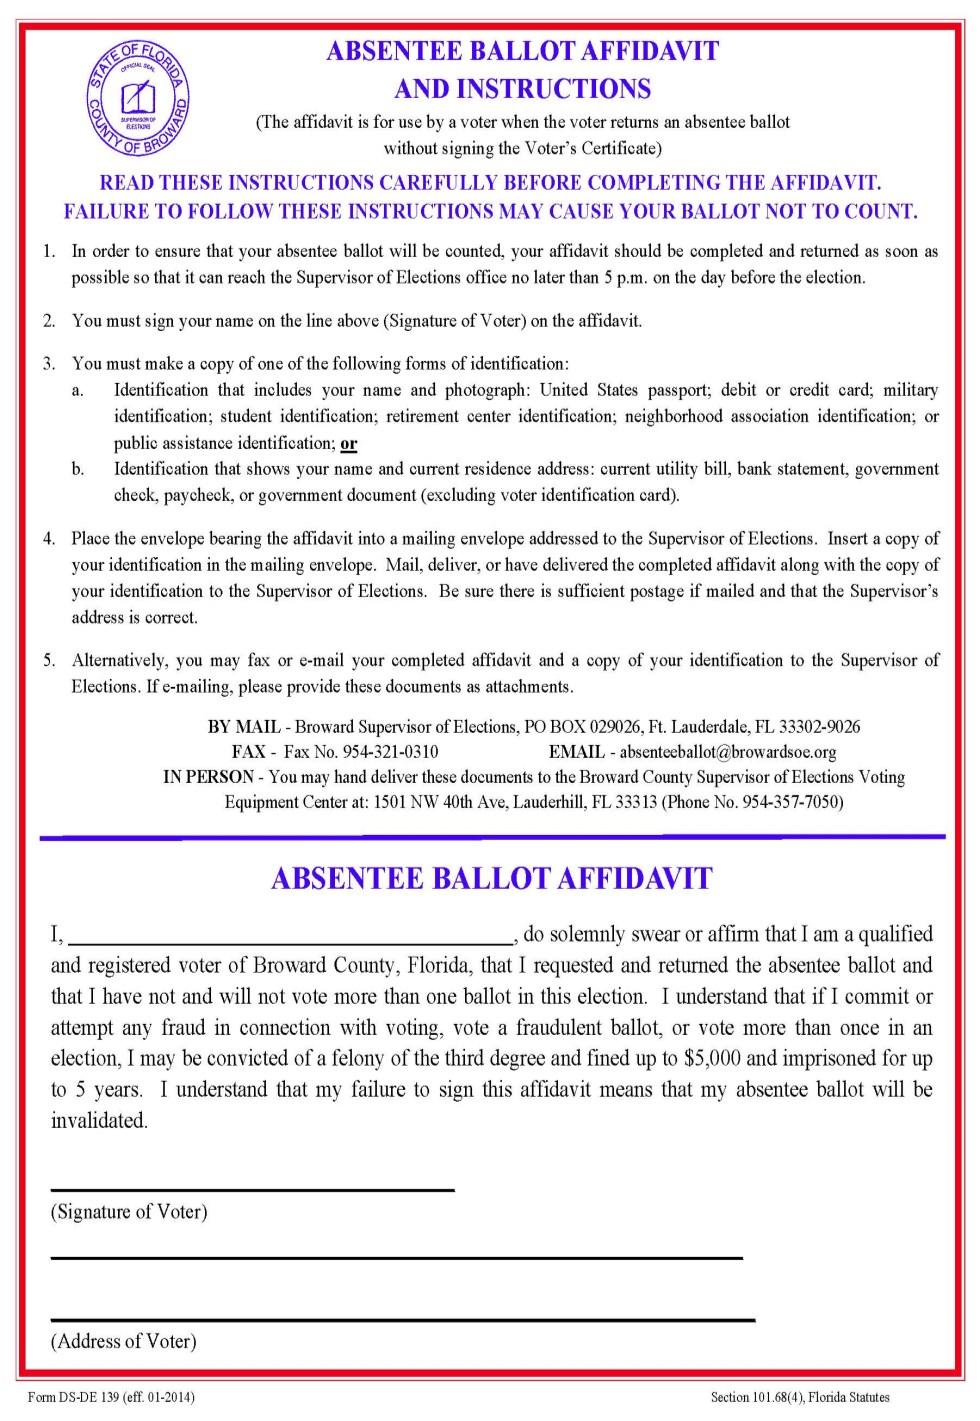 Absentee Ballot Affidavit The new 2014 Election Law allows the voter to cure the missing signature if he or she completes an absentee ballot affidavit.